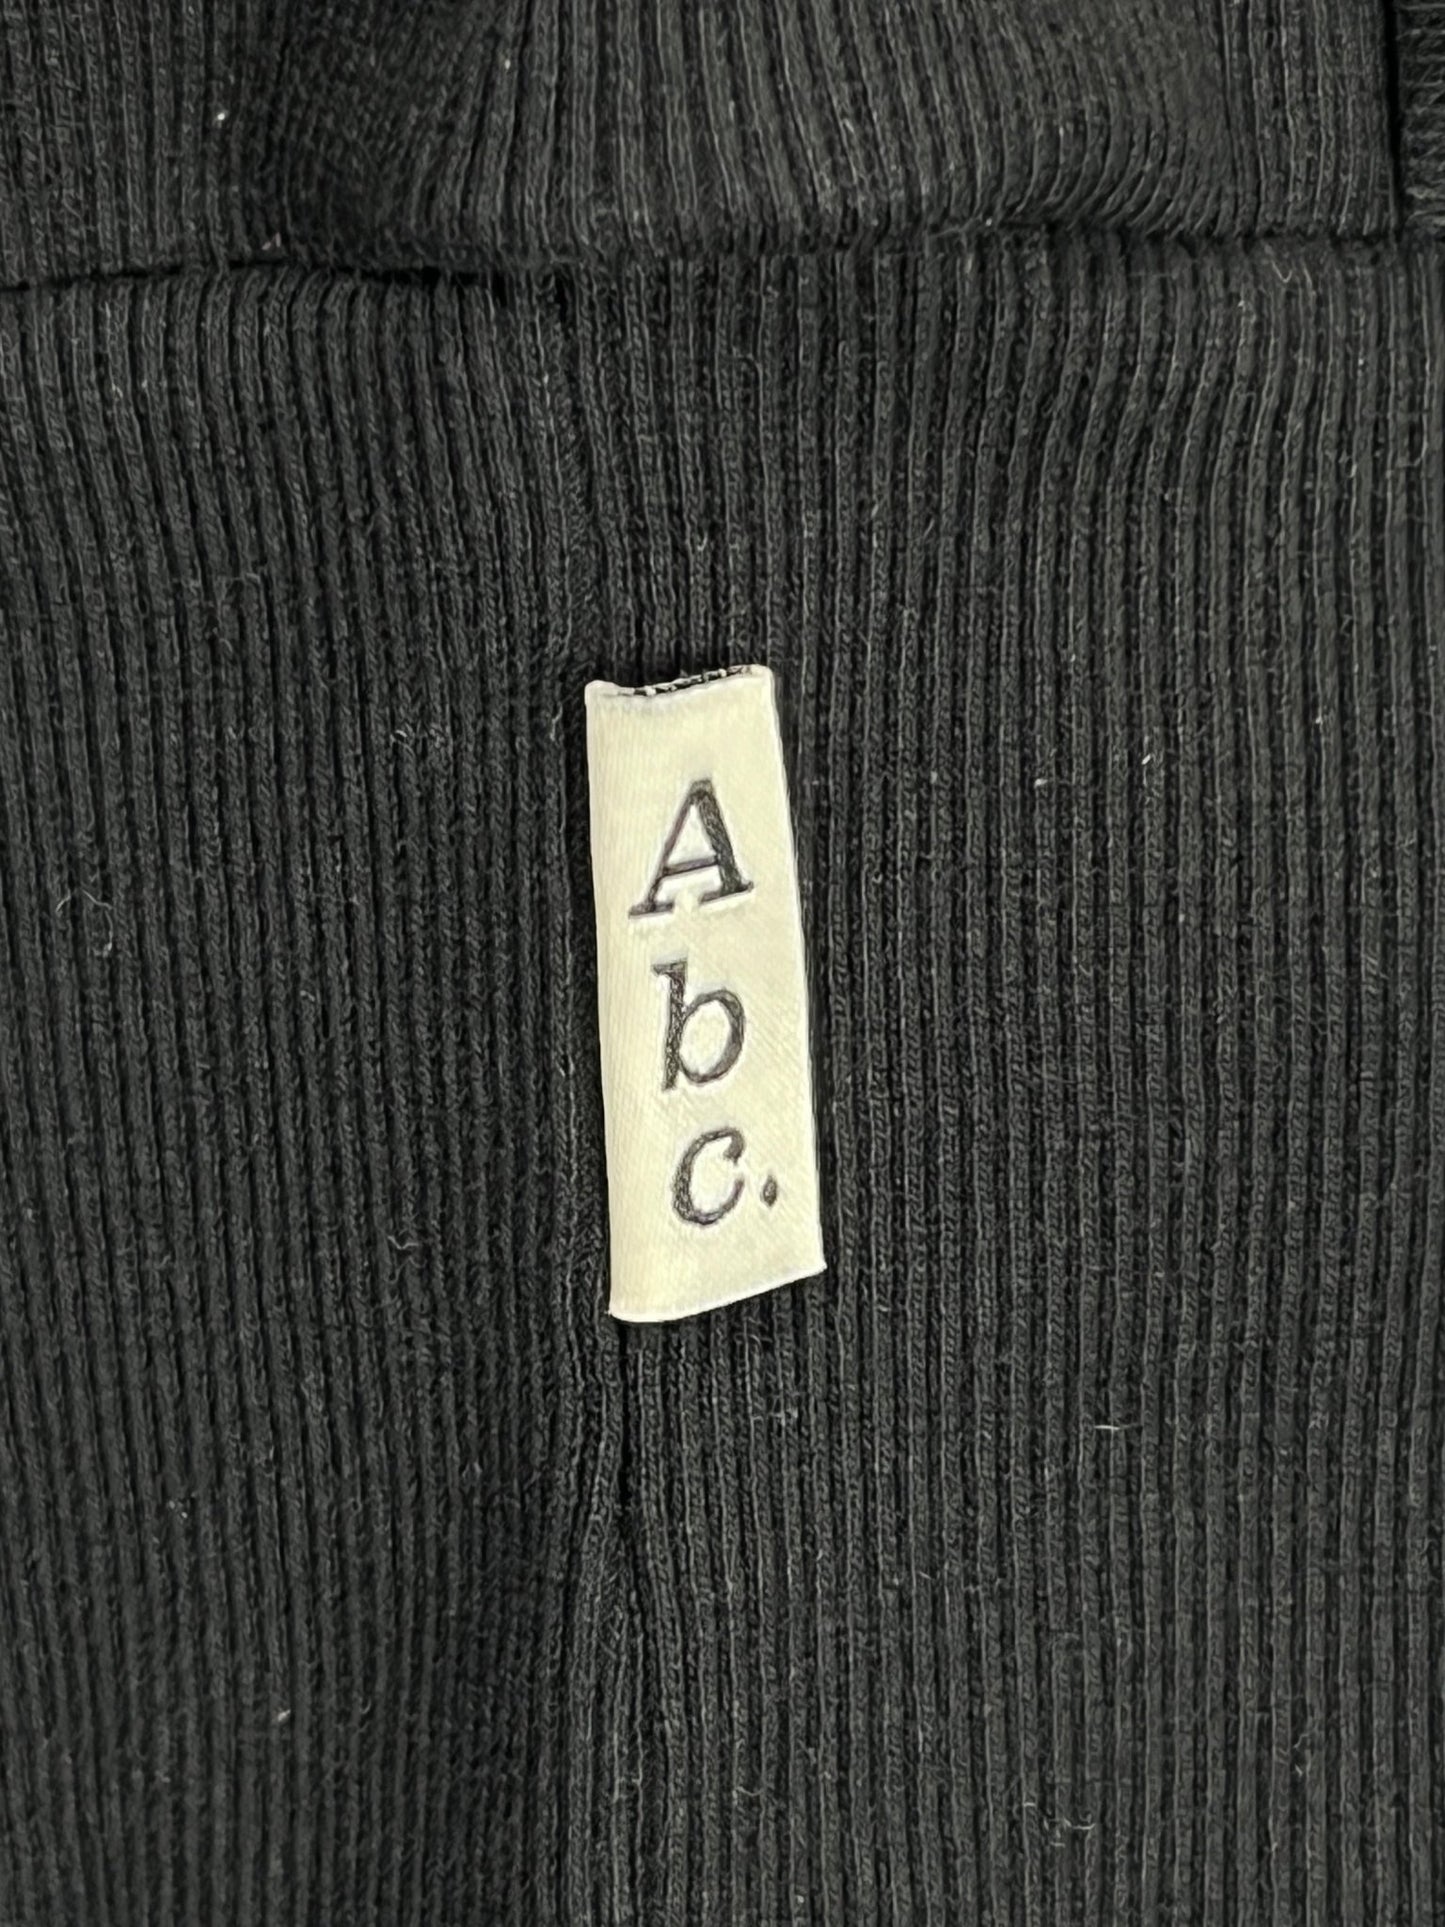 A close up of an ADVISORY BOARD CRYSTALS label on a black 100% cotton sweatshirt.